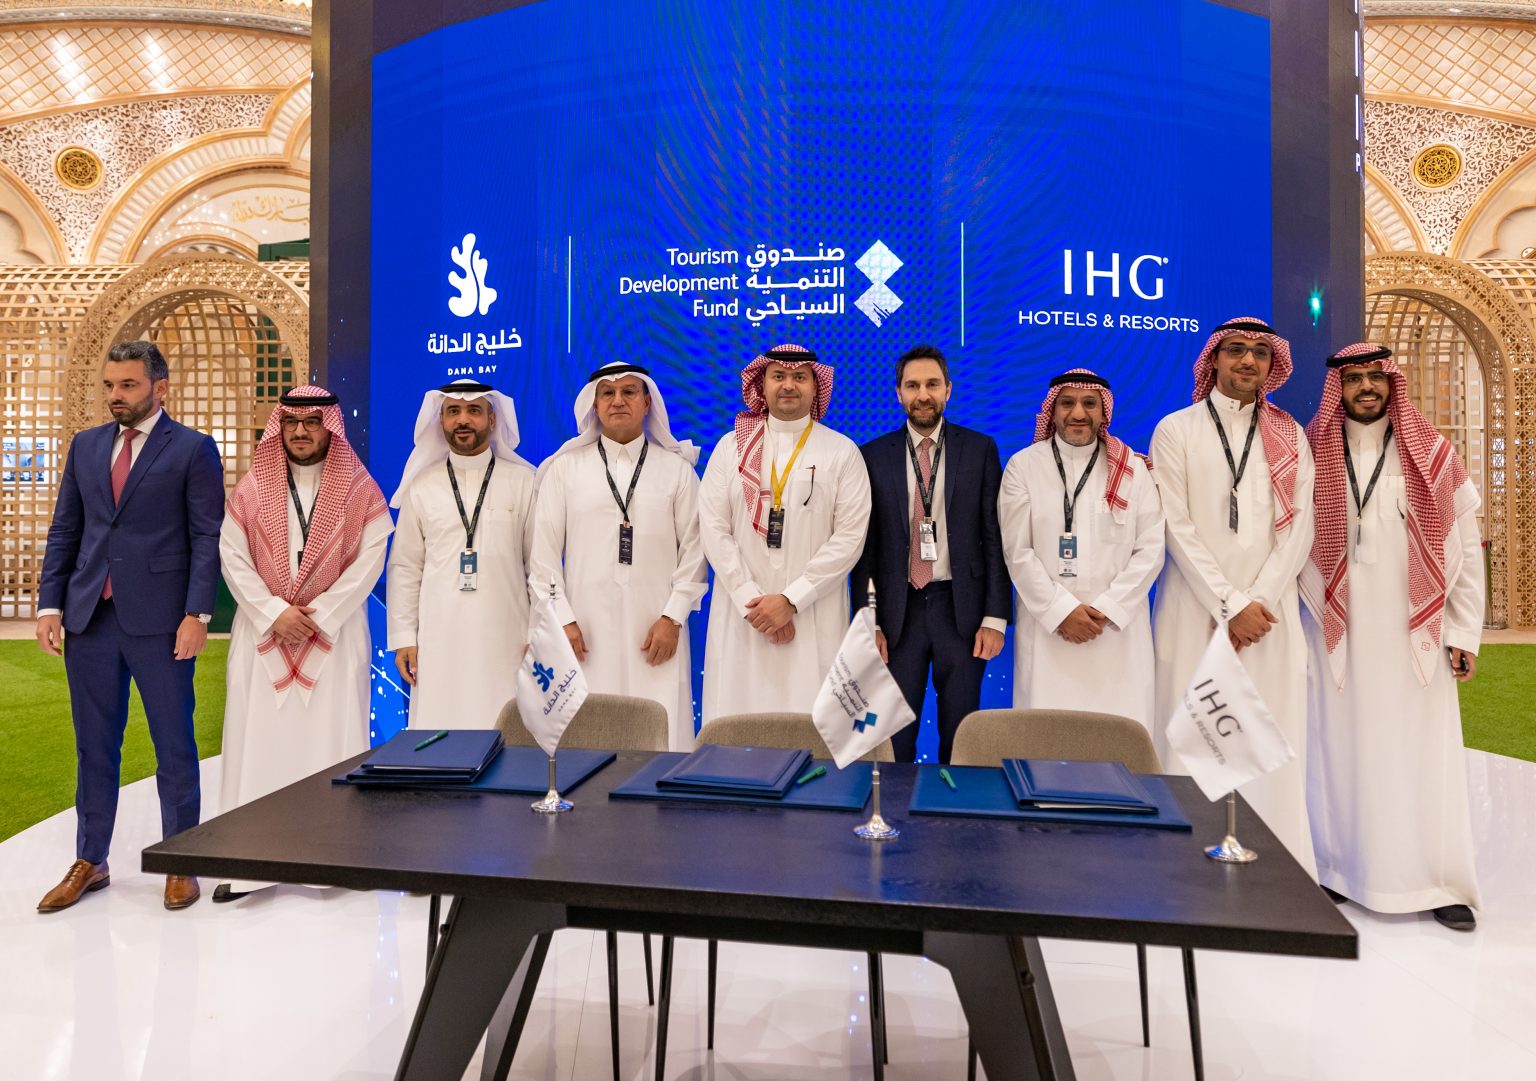 IHG signs the InterContinental Al Khobar, which is scheduled to open in 2024.